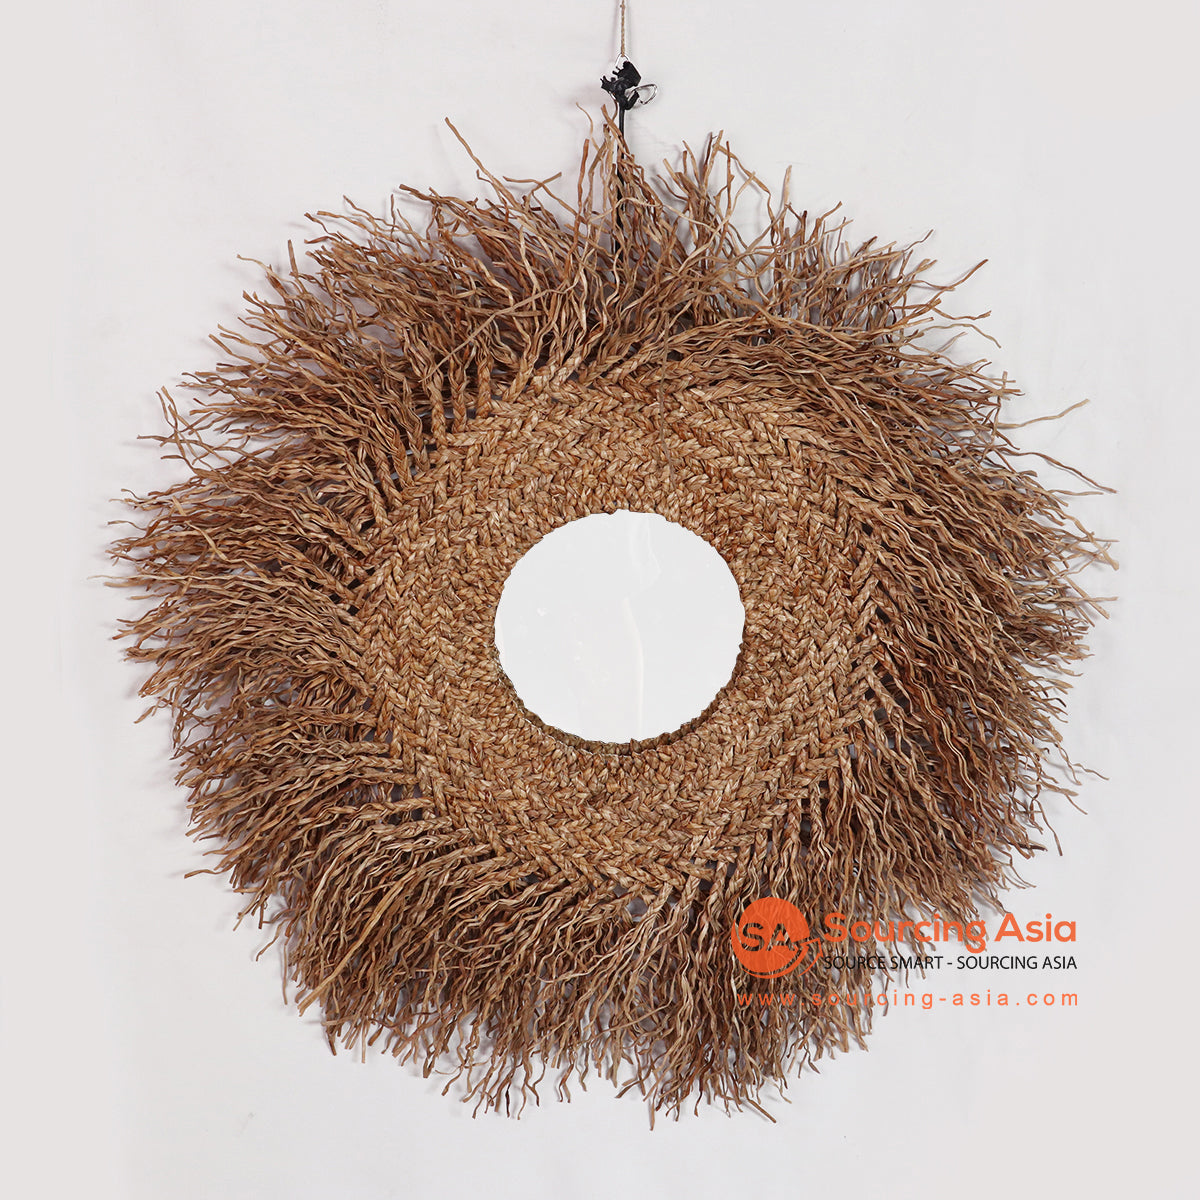 PDL005 NATURAL WOVEN SEAGRASS HANGING WALL DECORATION WITH FRINGE